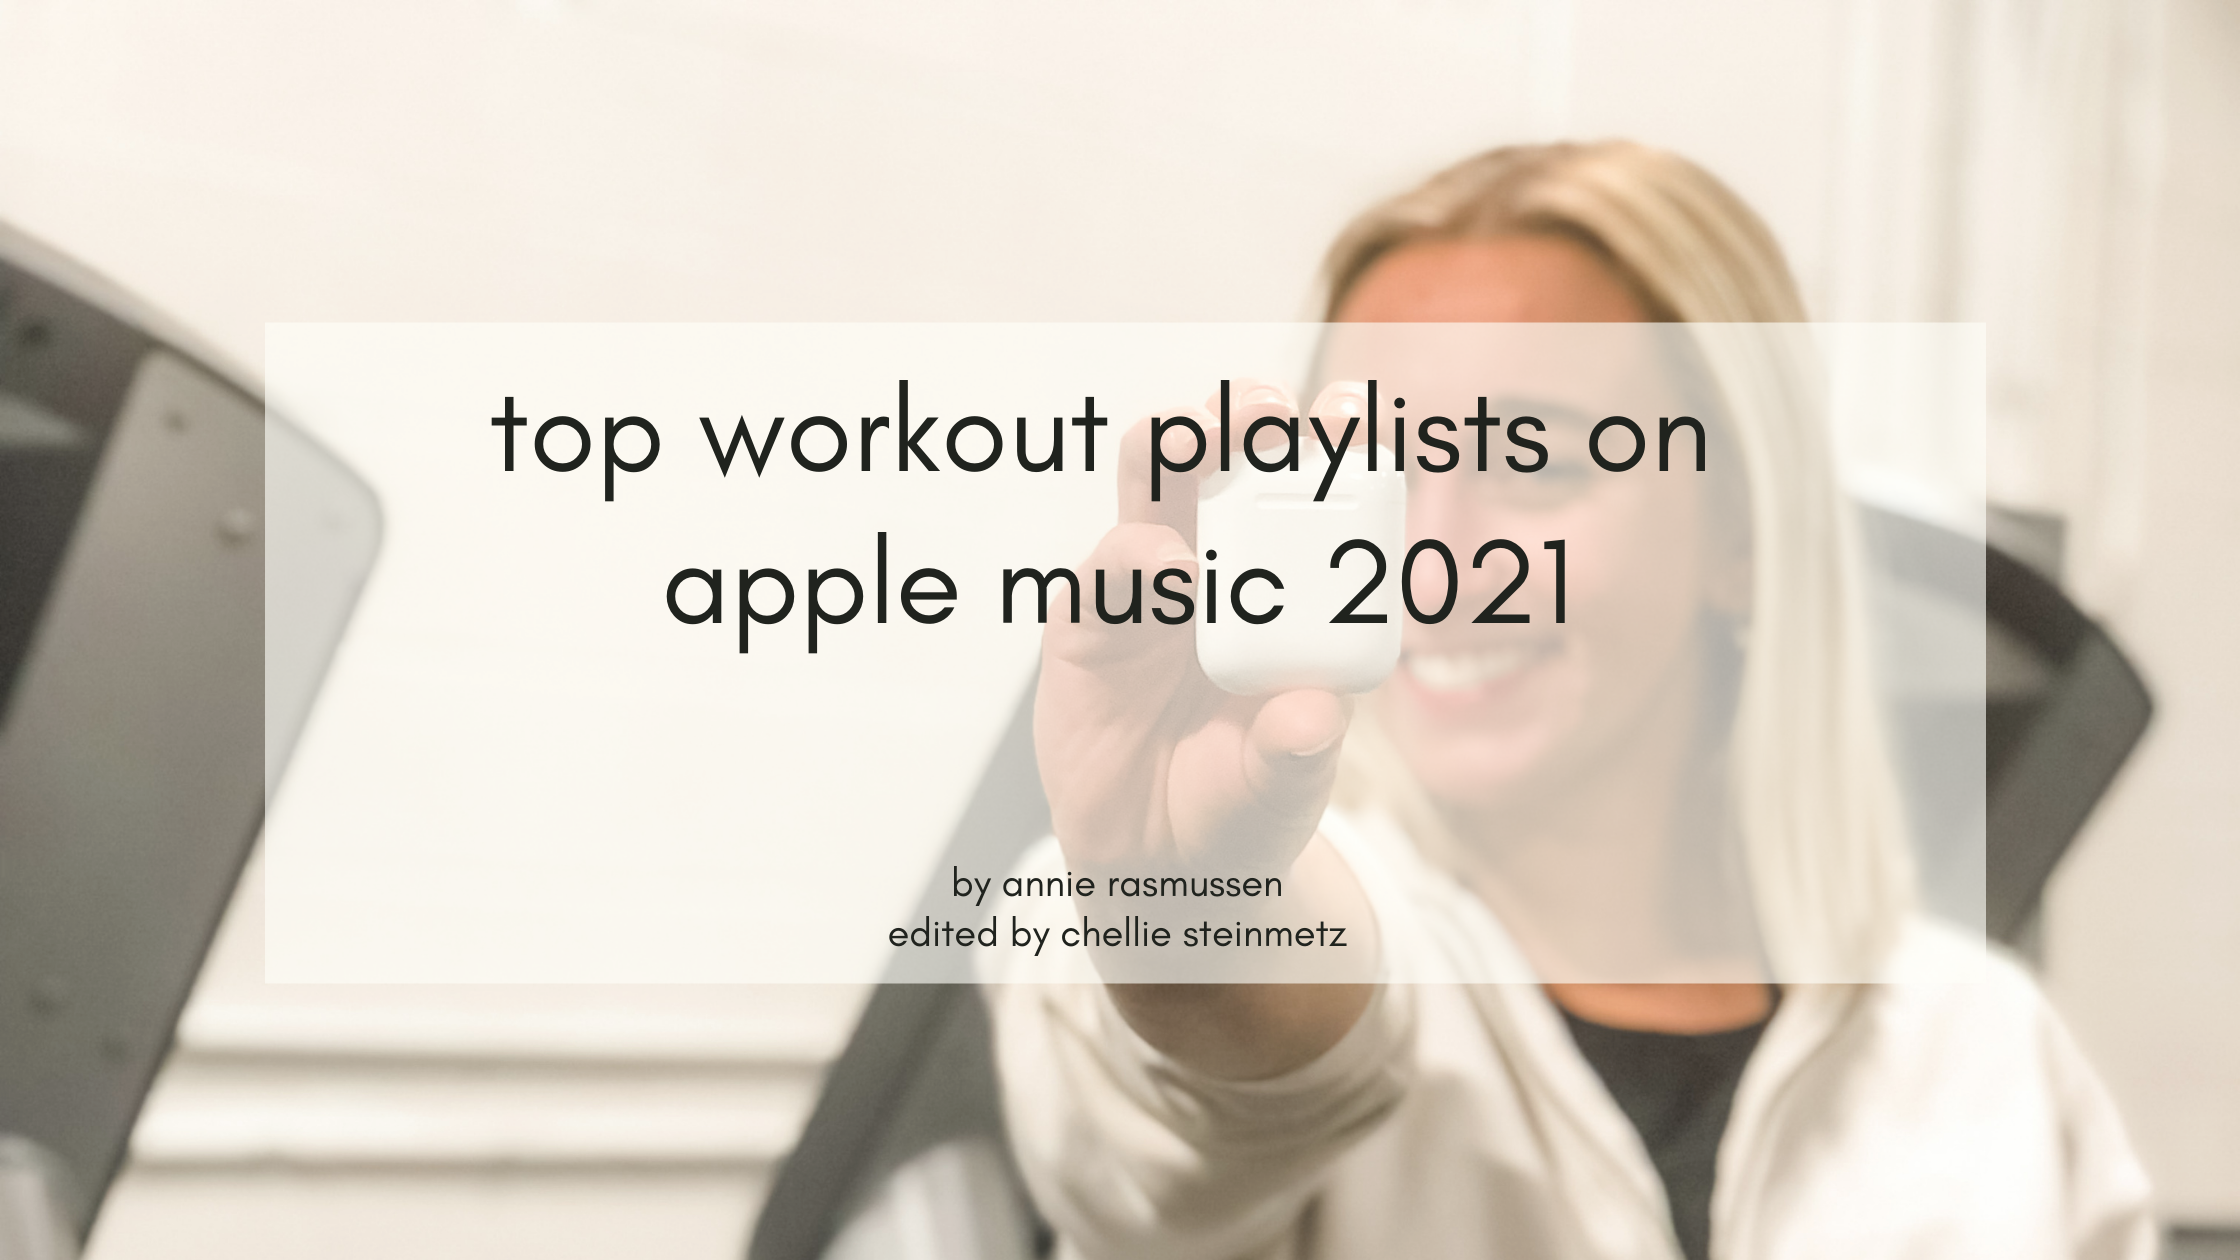 15 Top Workout Playlists on Apple Music Right Now And the Best Workouts to Pair with Them